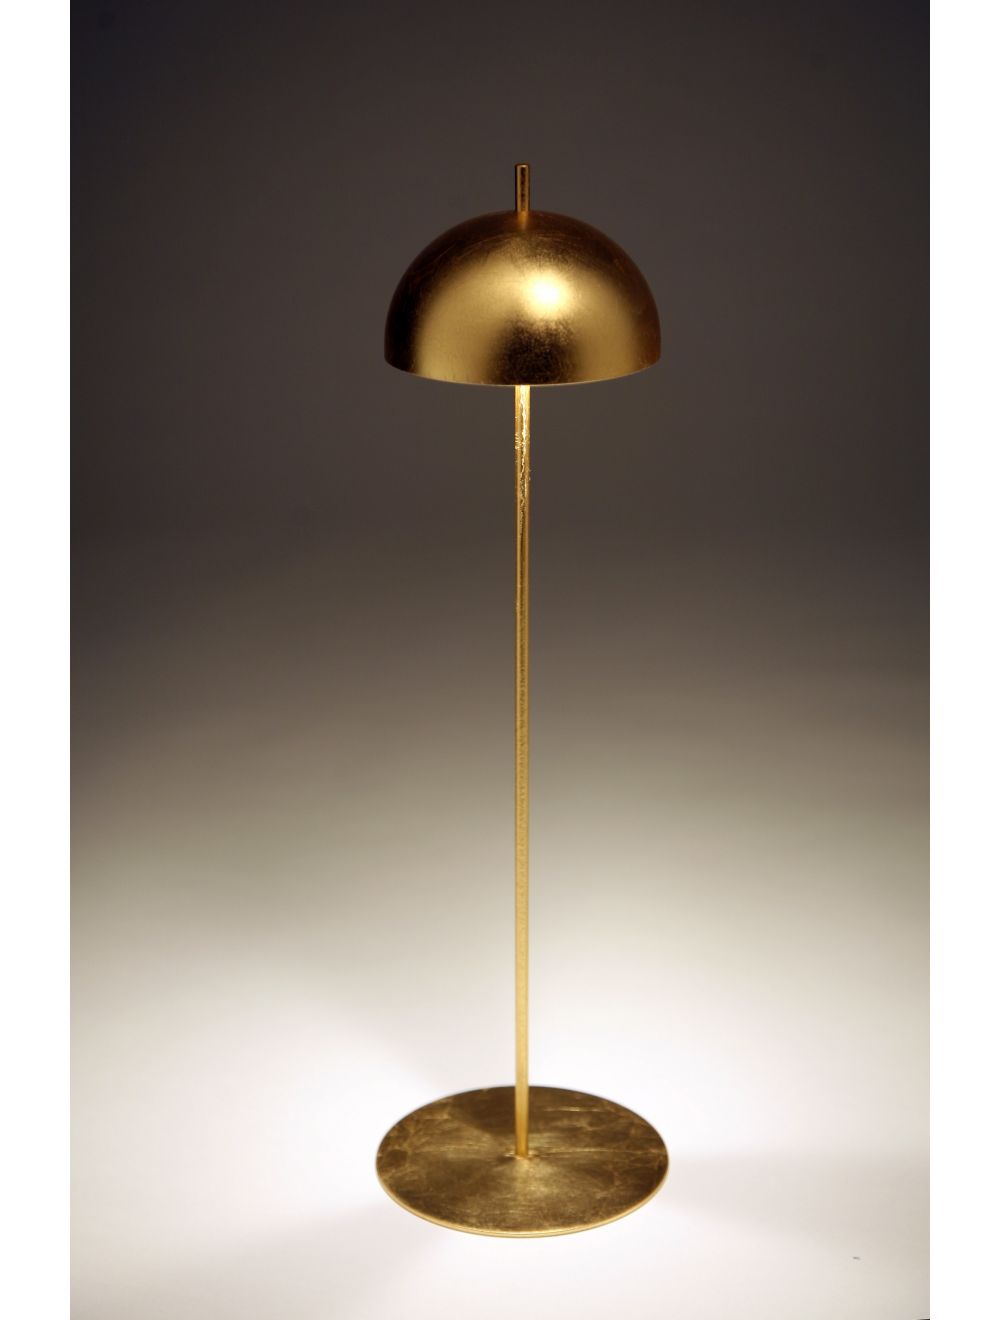 Battery Operated Table Lamp Ombelìn By, Do They Make Battery Operated Table Lamps